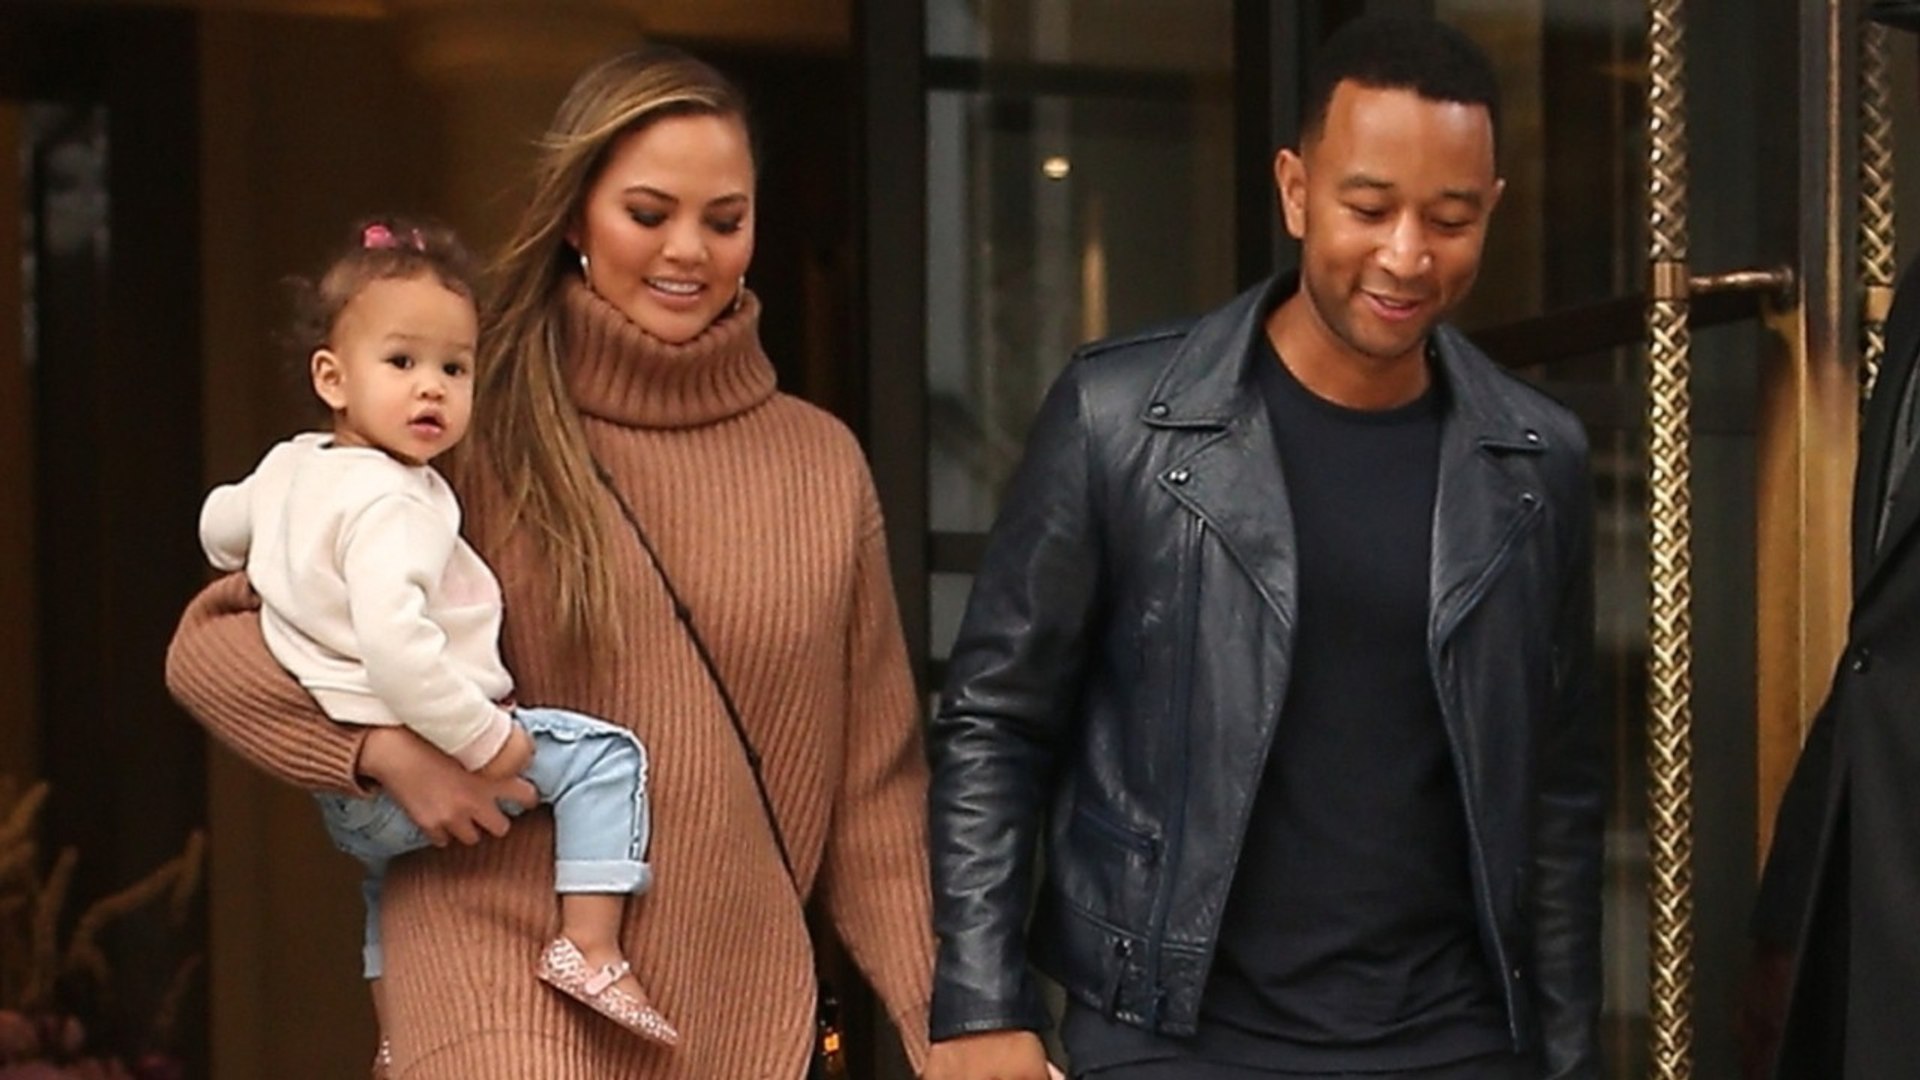 John Legend And His Daughter's Striking Resemblance